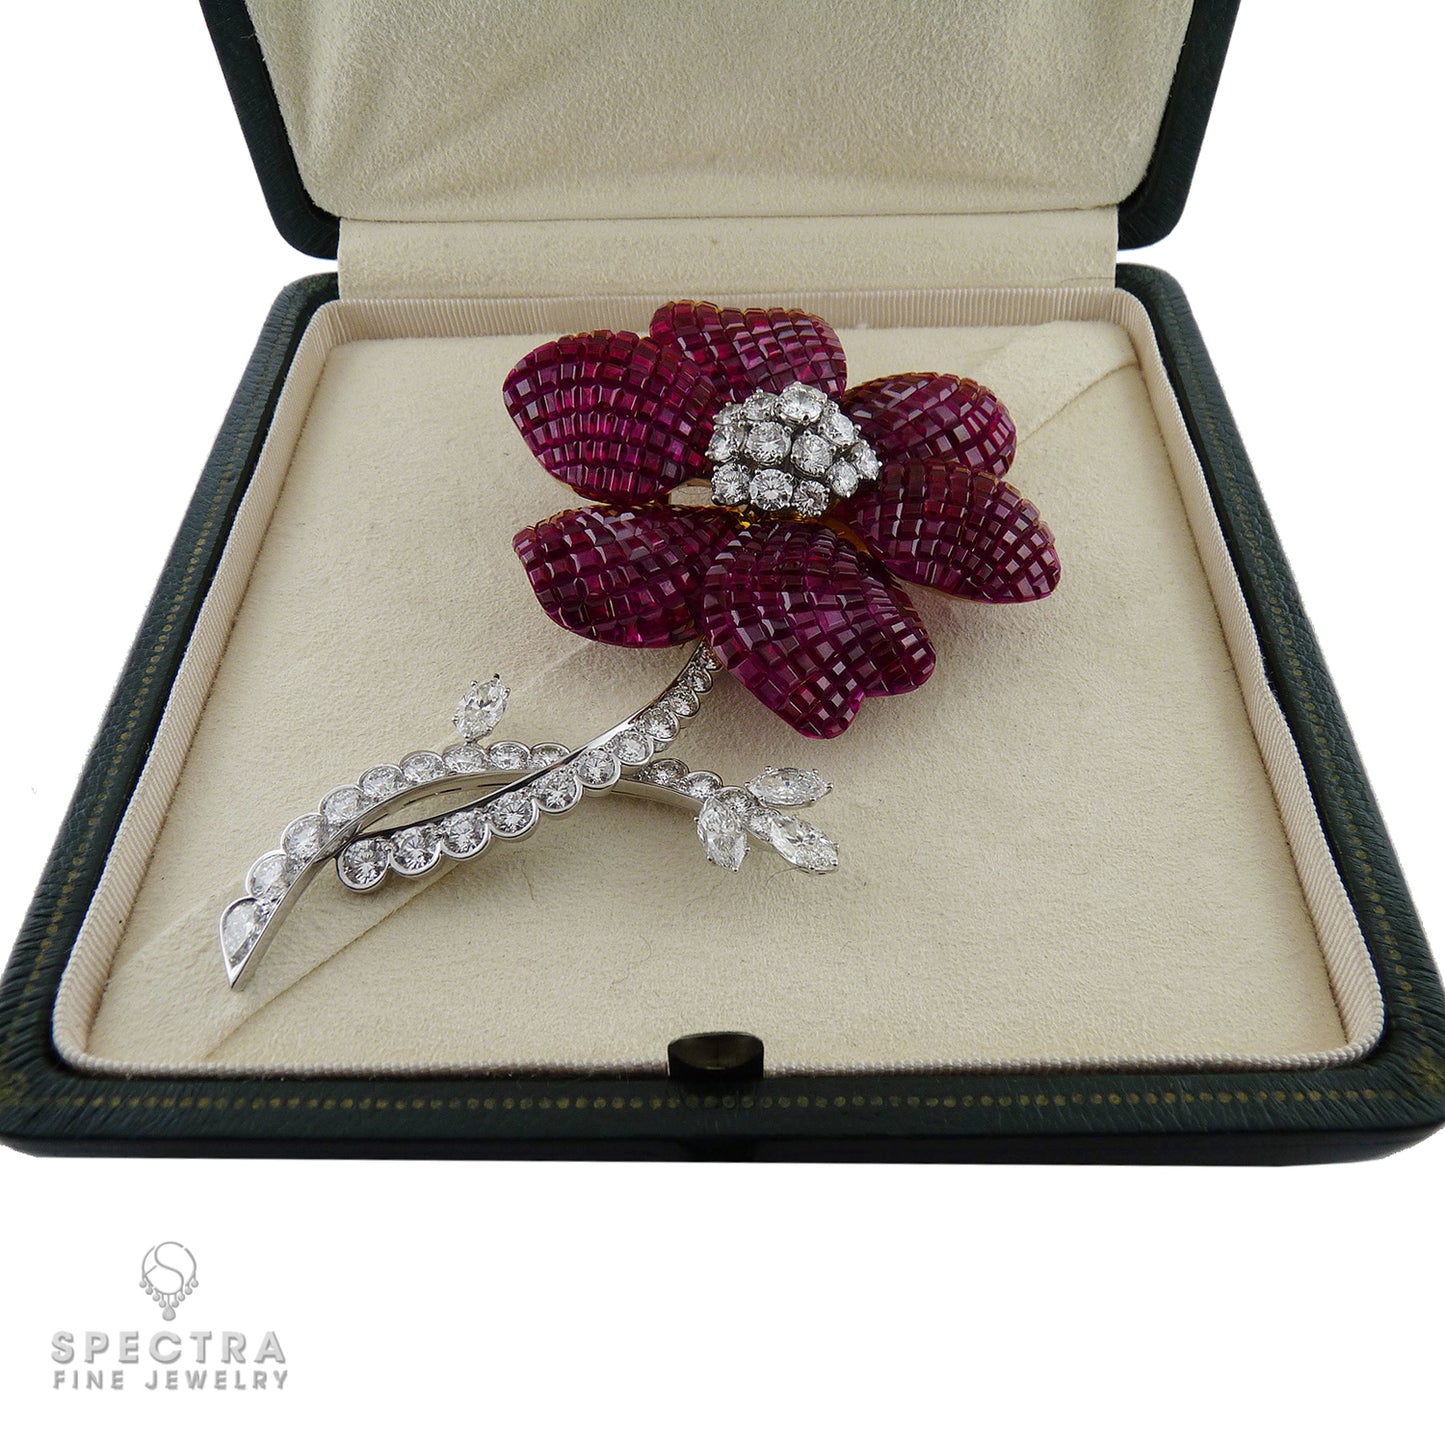 Aletto Brothers Invisibly Set Ruby Diamond Platinum Flower Convertible Brooch